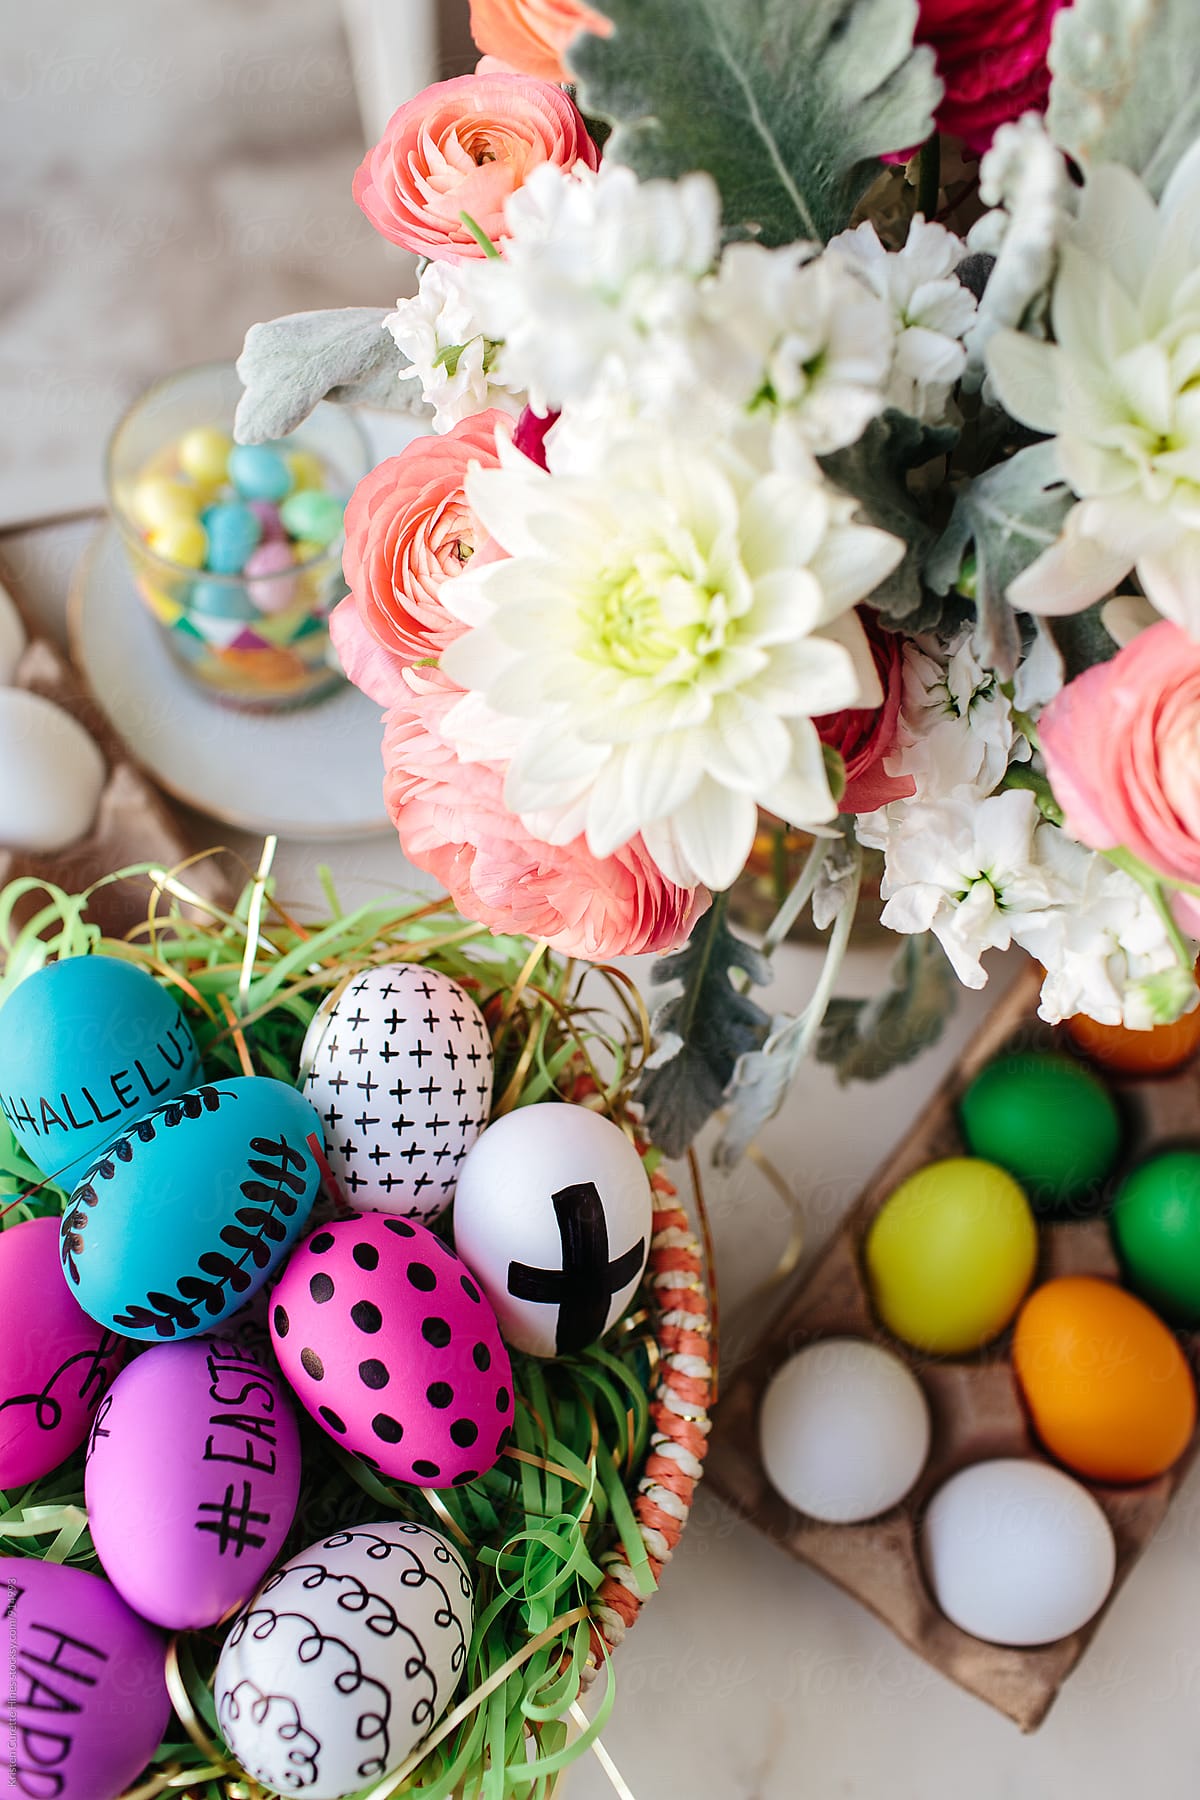 Hand drawn & colored easter eggs next to fresh cut flowers